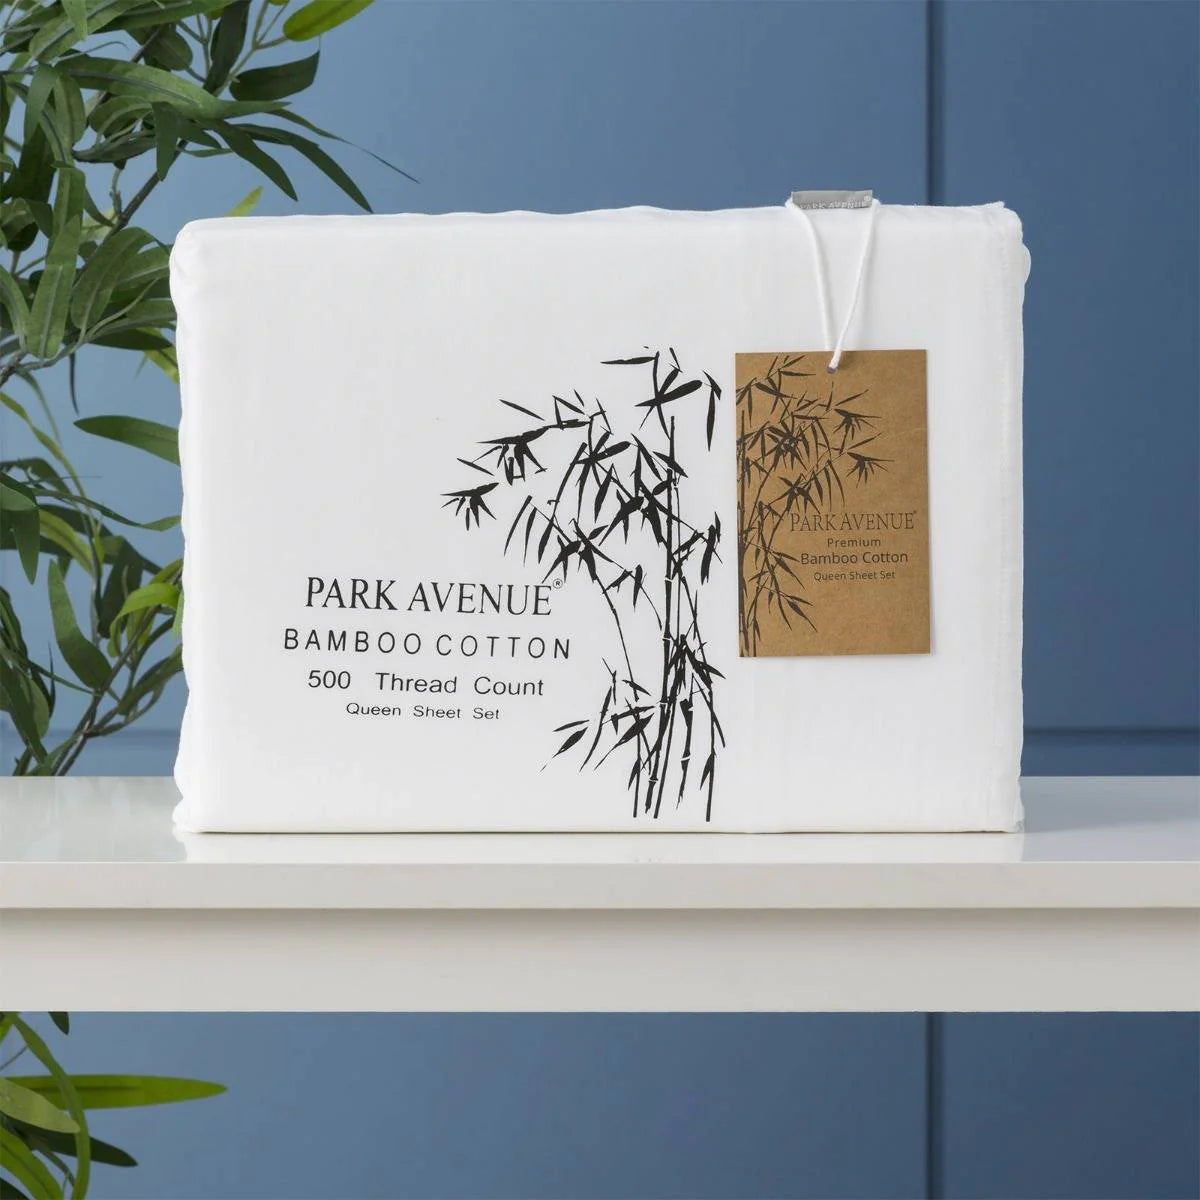 Park Avenue 500 Thread count Natural Bamboo Cotton Sheet sets. These Bamboo cotton blend sheet set has been made with the finest 50 % bamboo and 50 % cotton fibres, the naturally silky smooth and unique sheen of the bamboo protects your skin against any irritation.